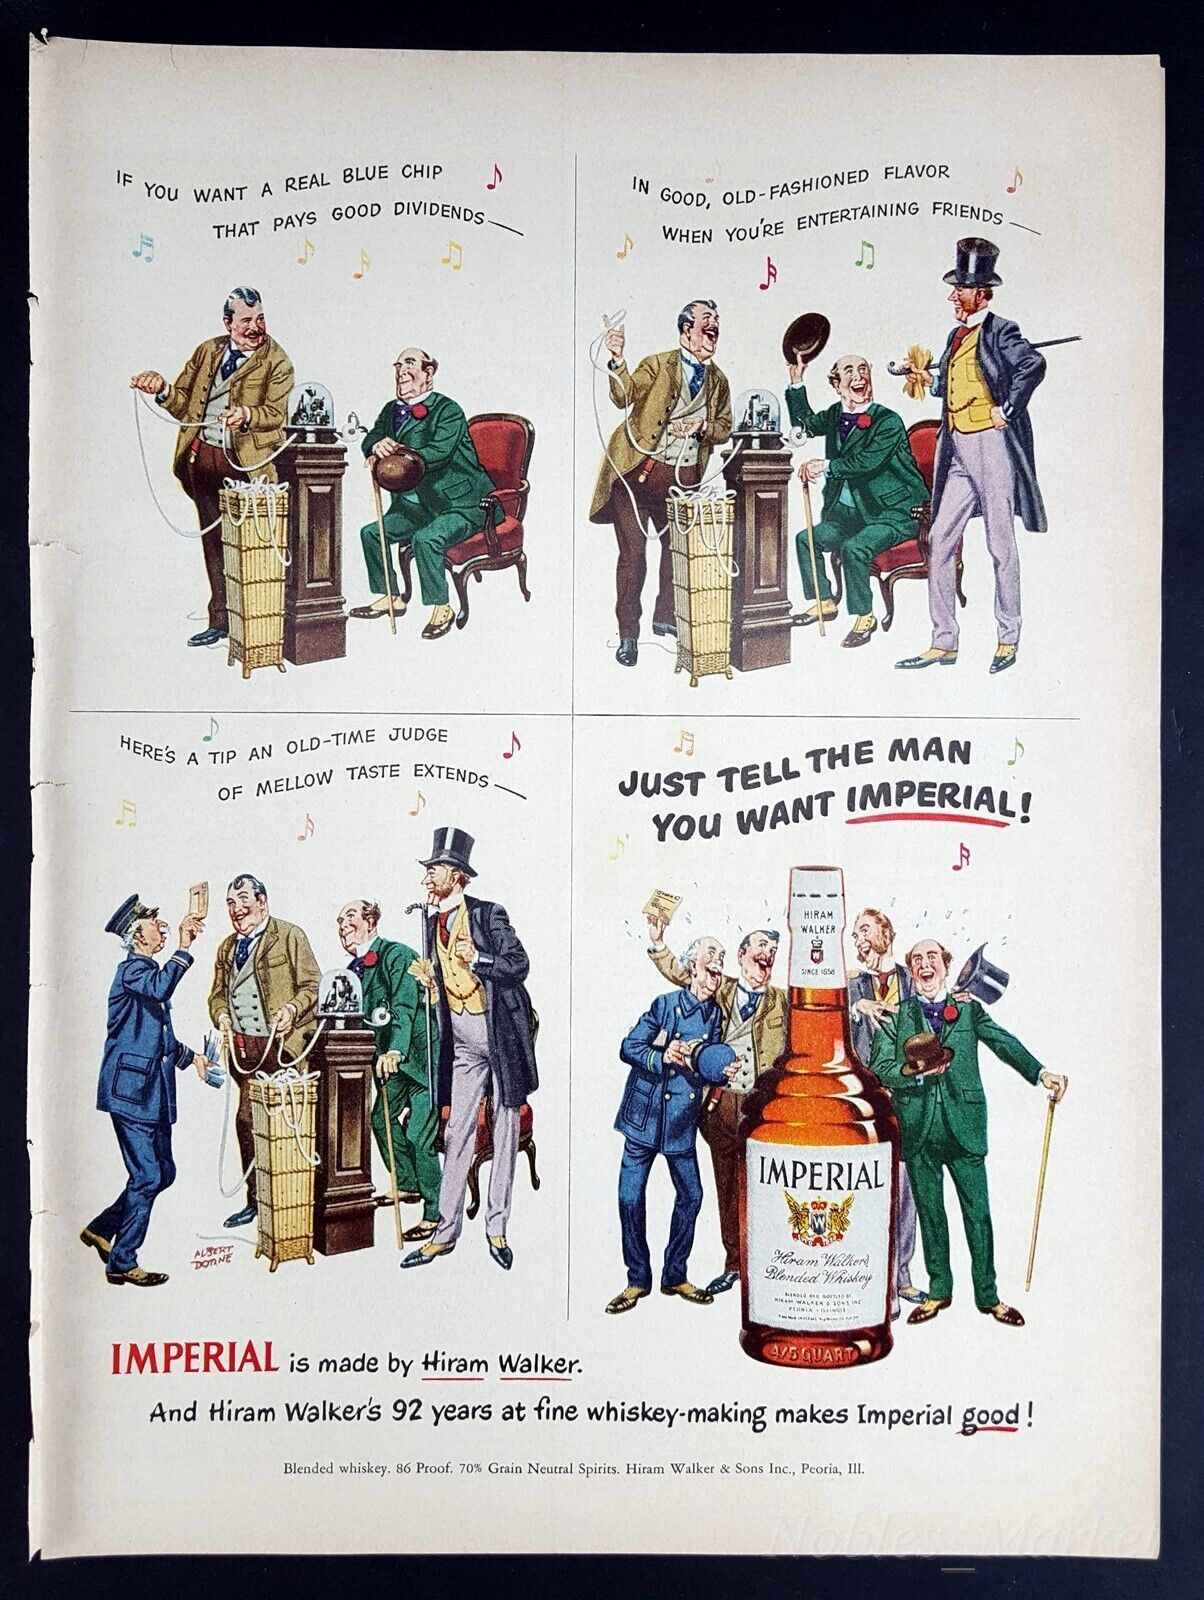 Primary image for 1950 Imperial Hiram Walker Whiskey Vintage Magazine Print Ad